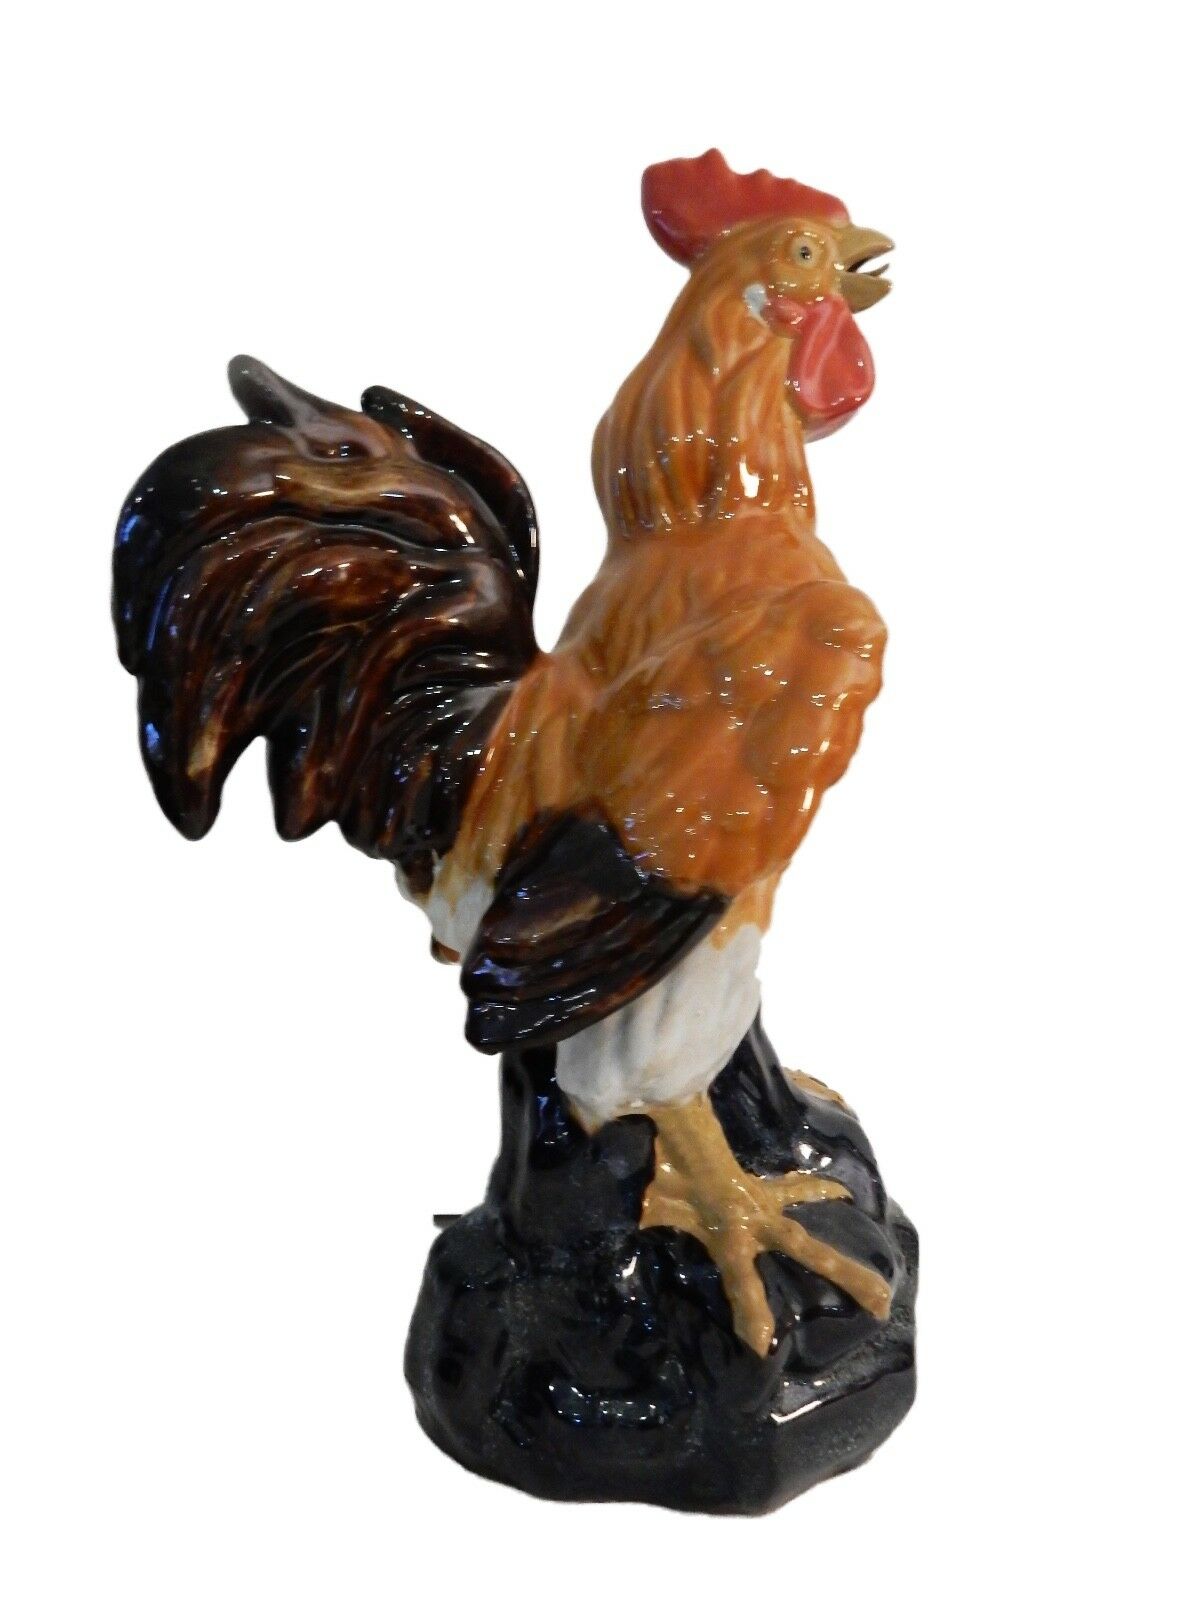 #266 Superb LG  Chinese Ceramic Figure of a  Rooster 17.5"H